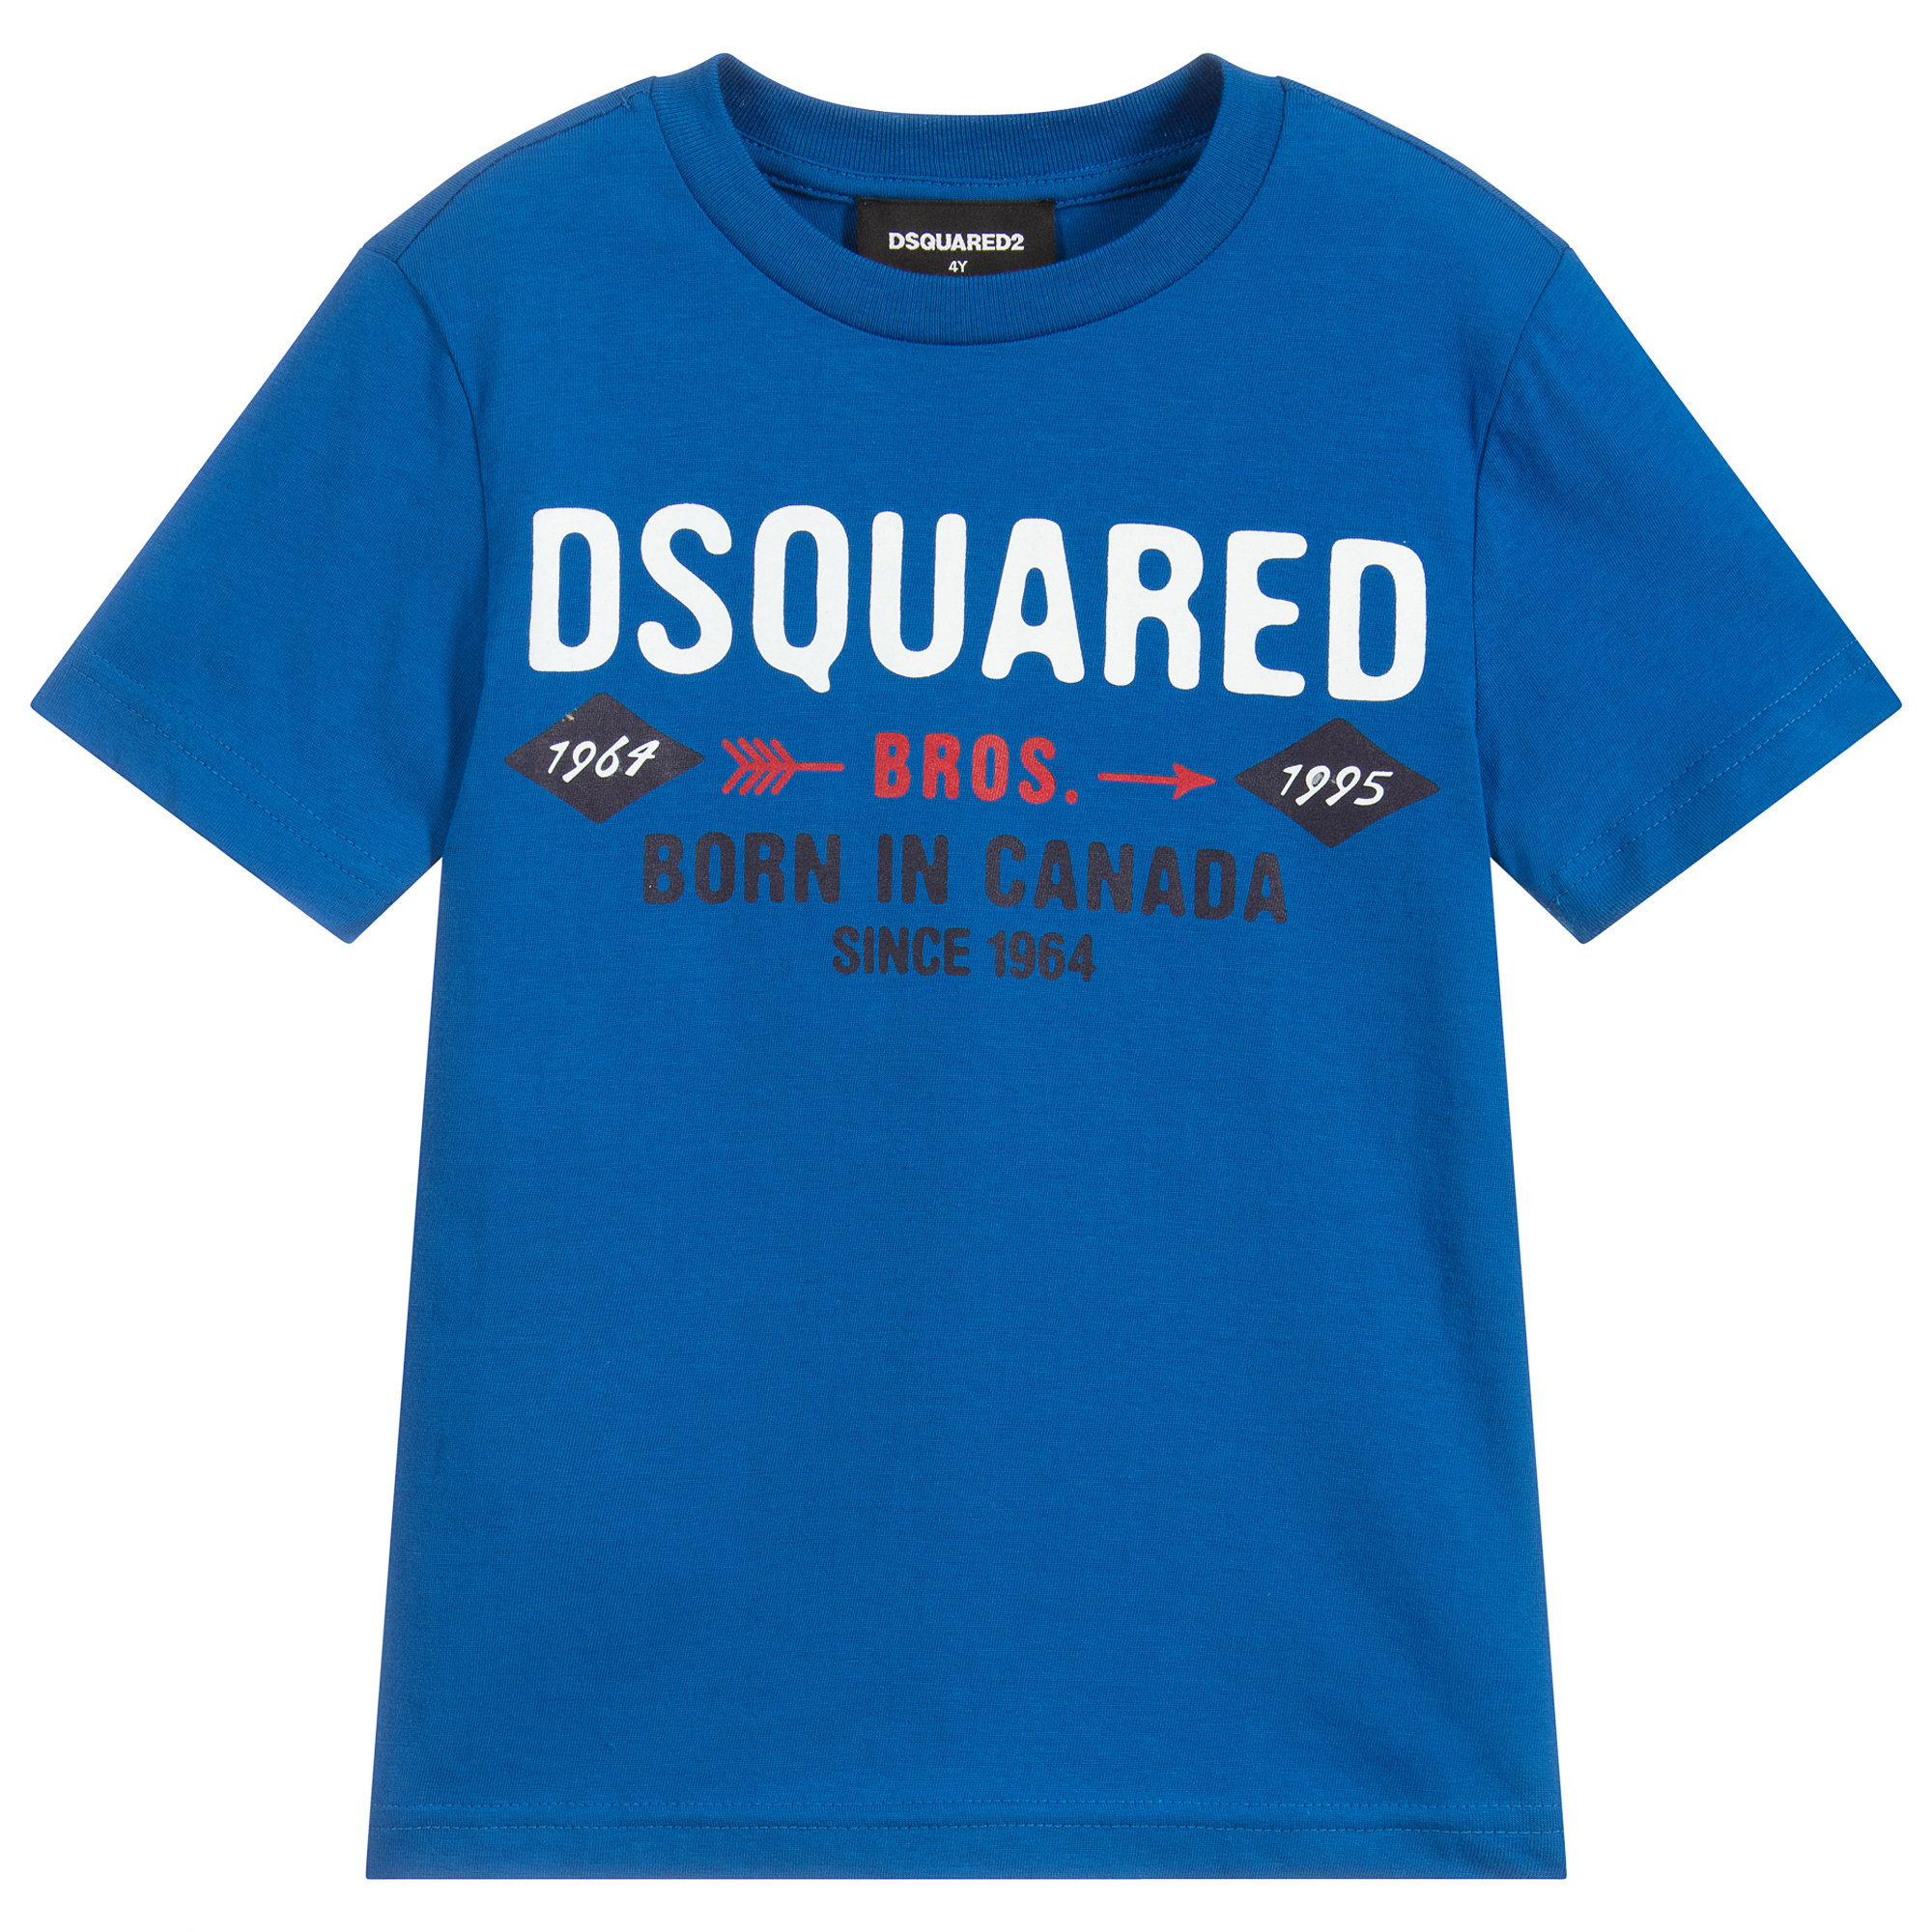 dsquared shirt baby